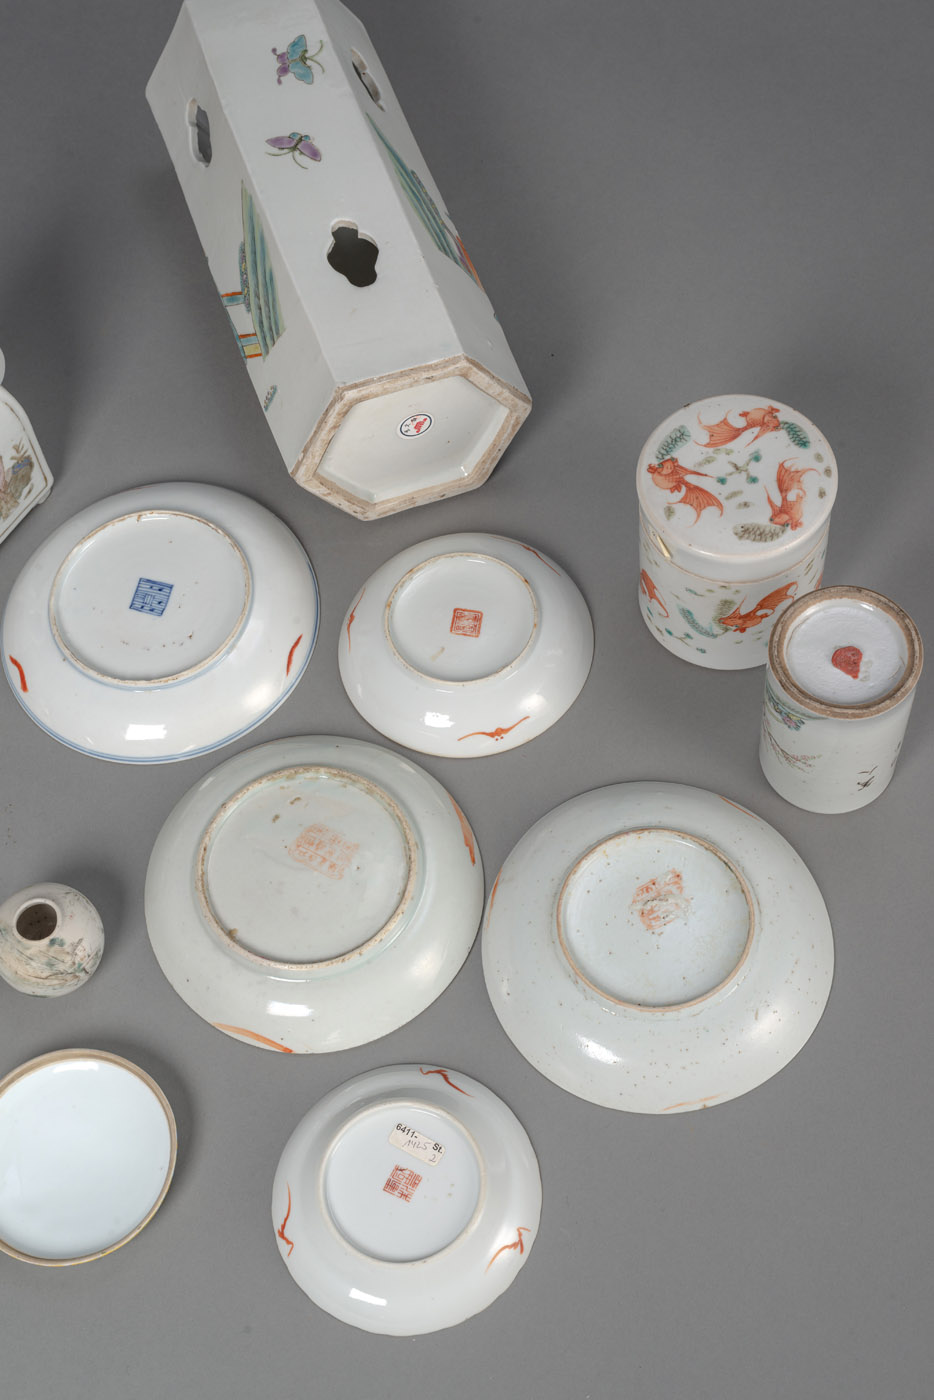 A GROUP OF 'FAMILLE ROSE' PORCELAIN PIECES, E.G. A HATSTAND, TWO TEAPOTS, BOXES AND BOWLS - Image 4 of 5